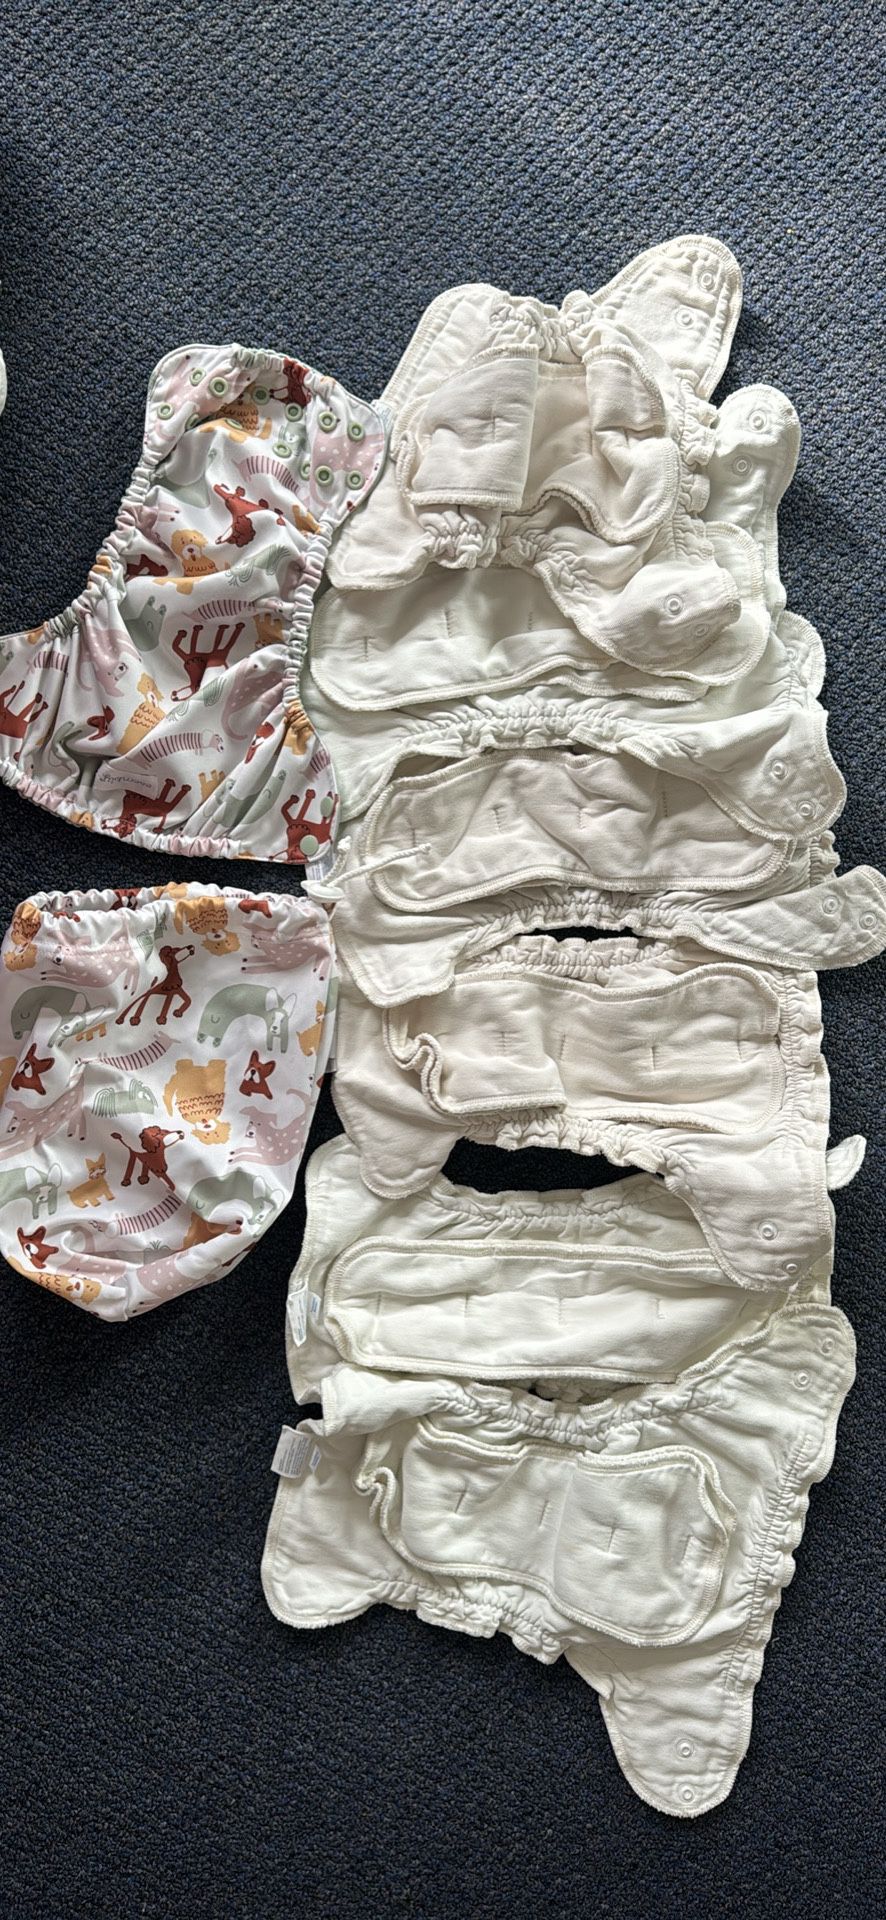 Esembly Cloth Diapers 